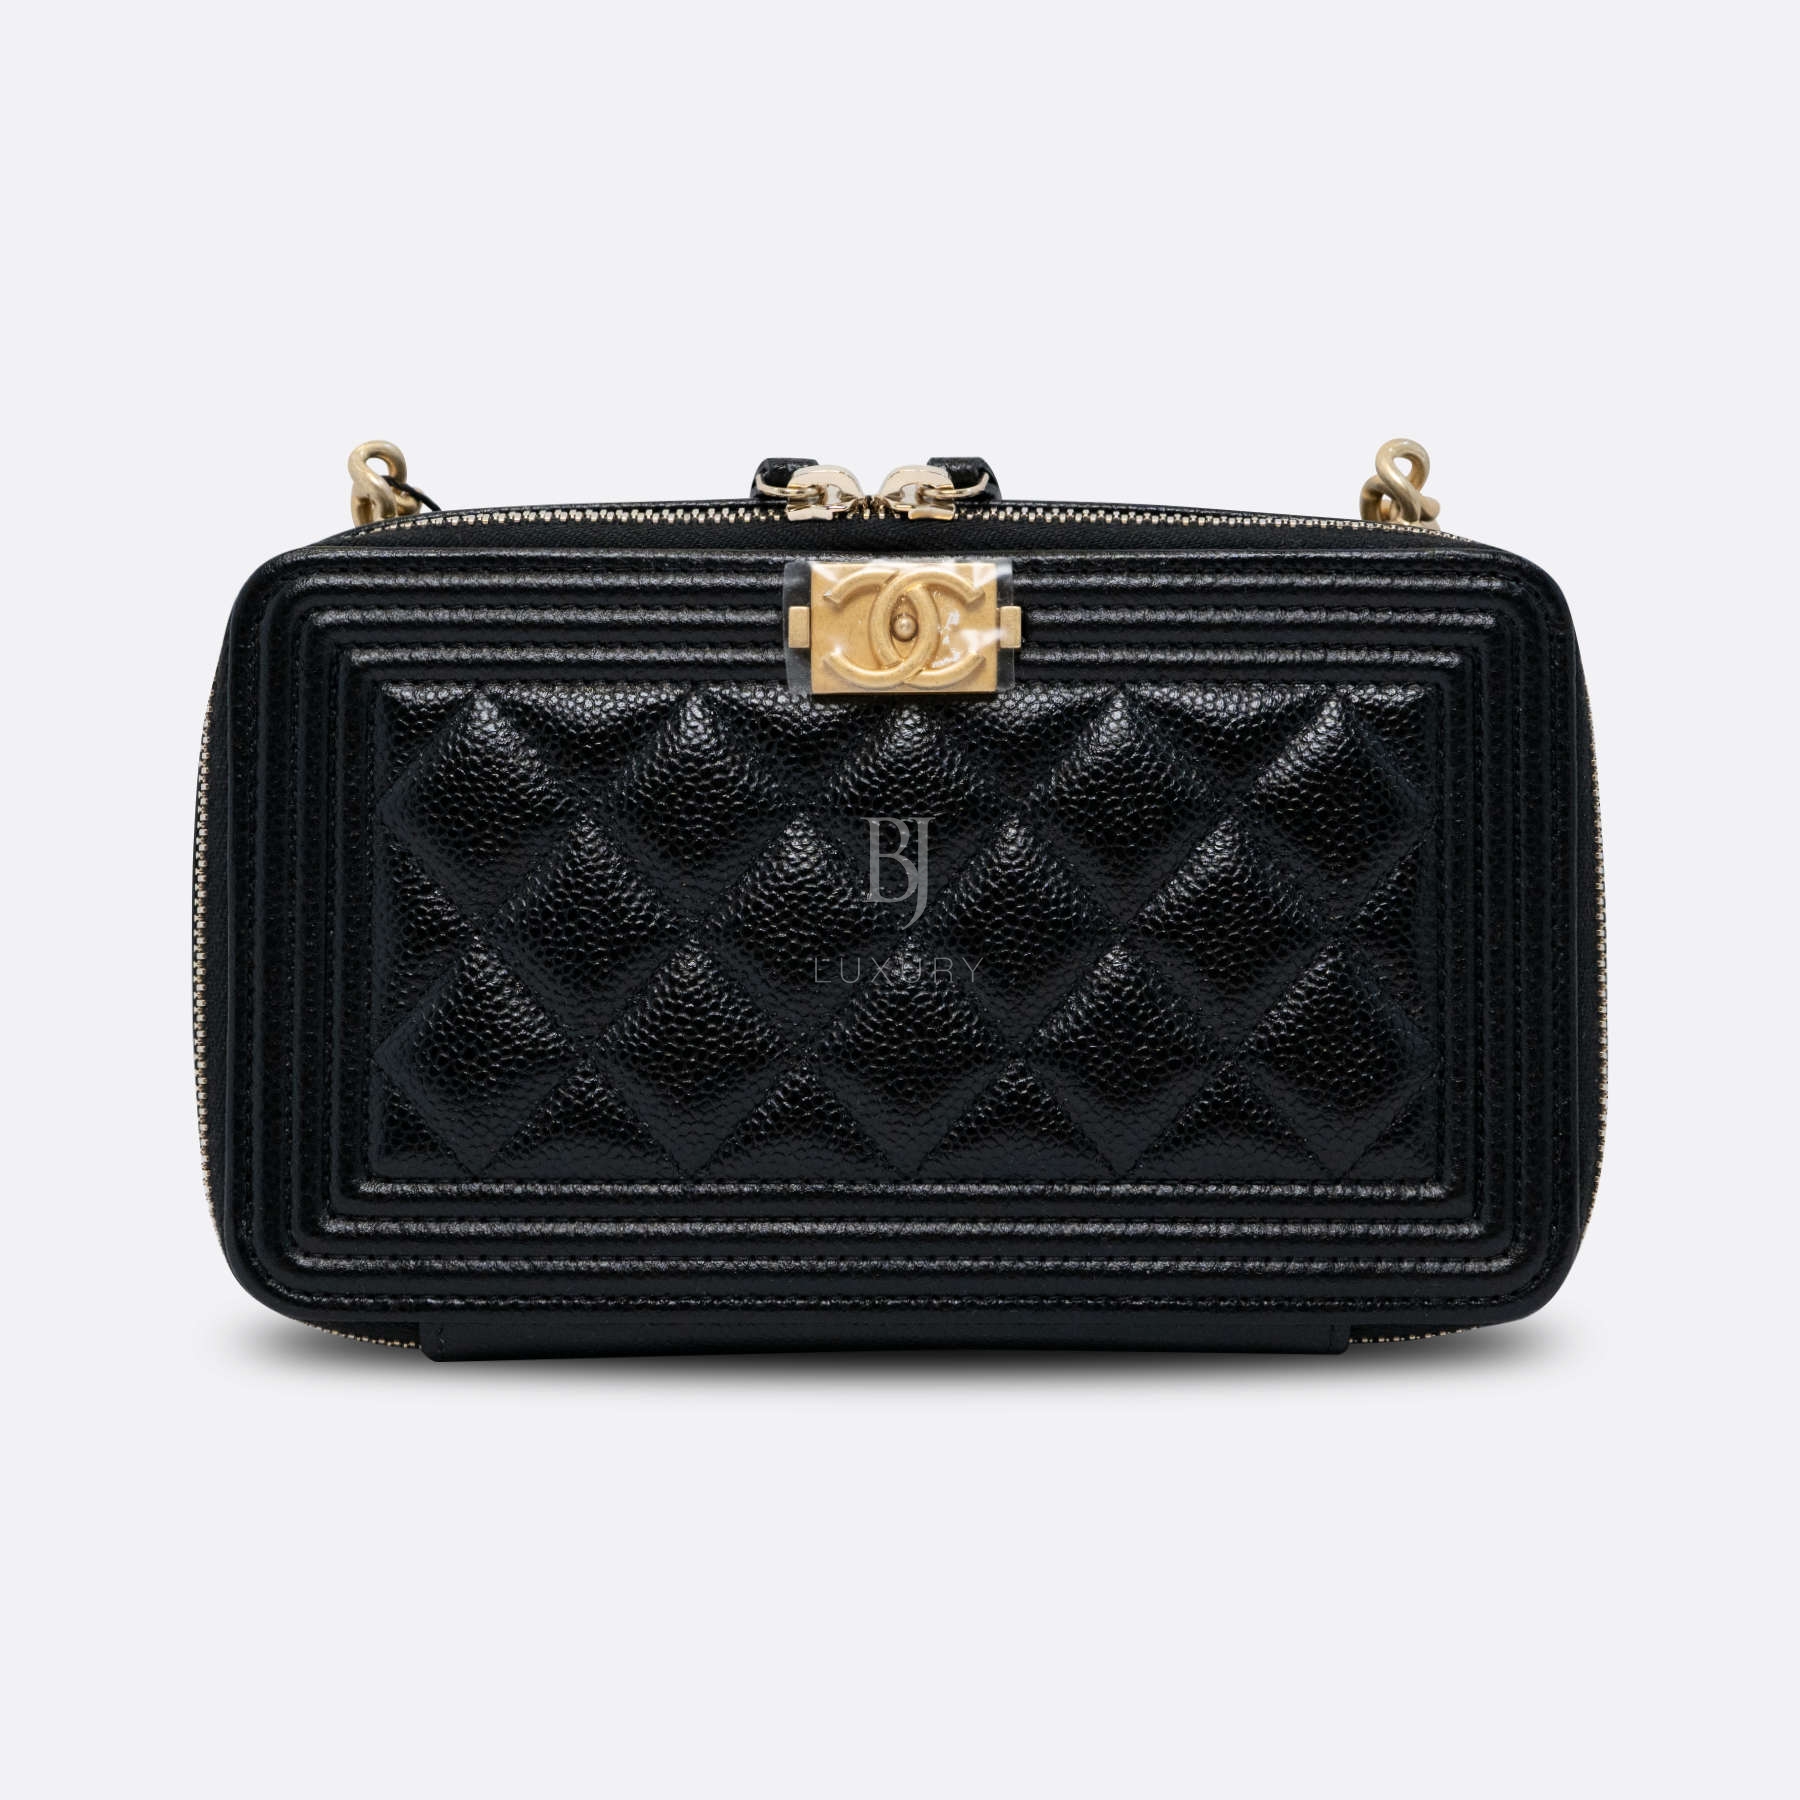 CHANEL-CLUTCHWITHCHAIN-MINI-BLACK-CAVIAR-4480 front.jpg